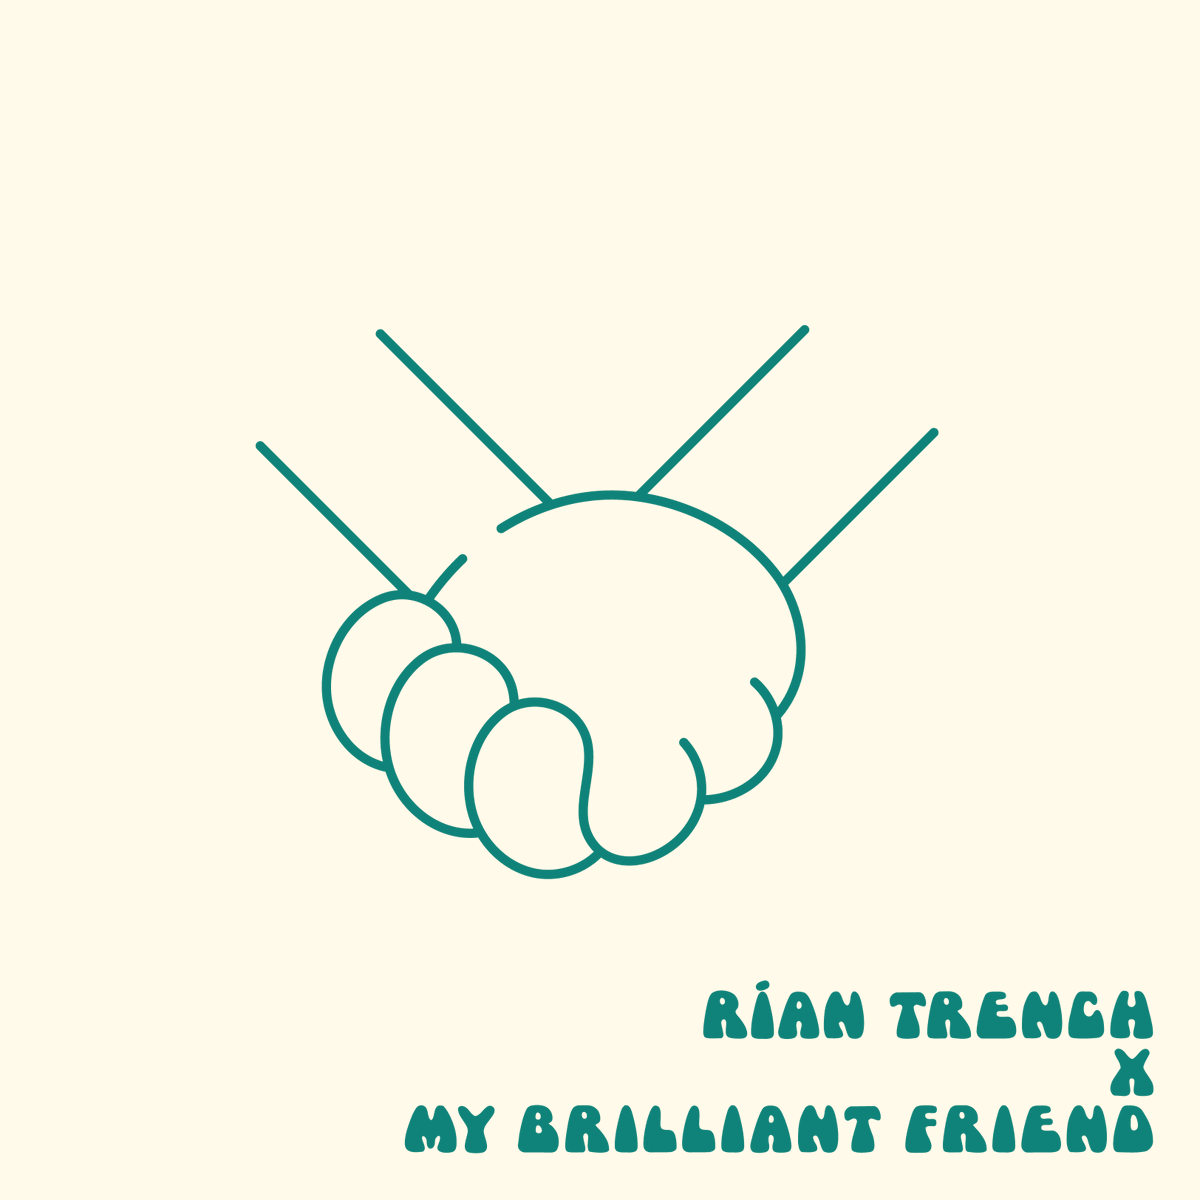 Love to everyone listening to the remixes & big love to Rían Trench. We had some amount of craic recording Where I Should End with him. He has an amazing gift of unsticking us when we get stuck. So exciting to hear his magic on My Brilliant Friend❤️link in bio Art: Gavin Connell